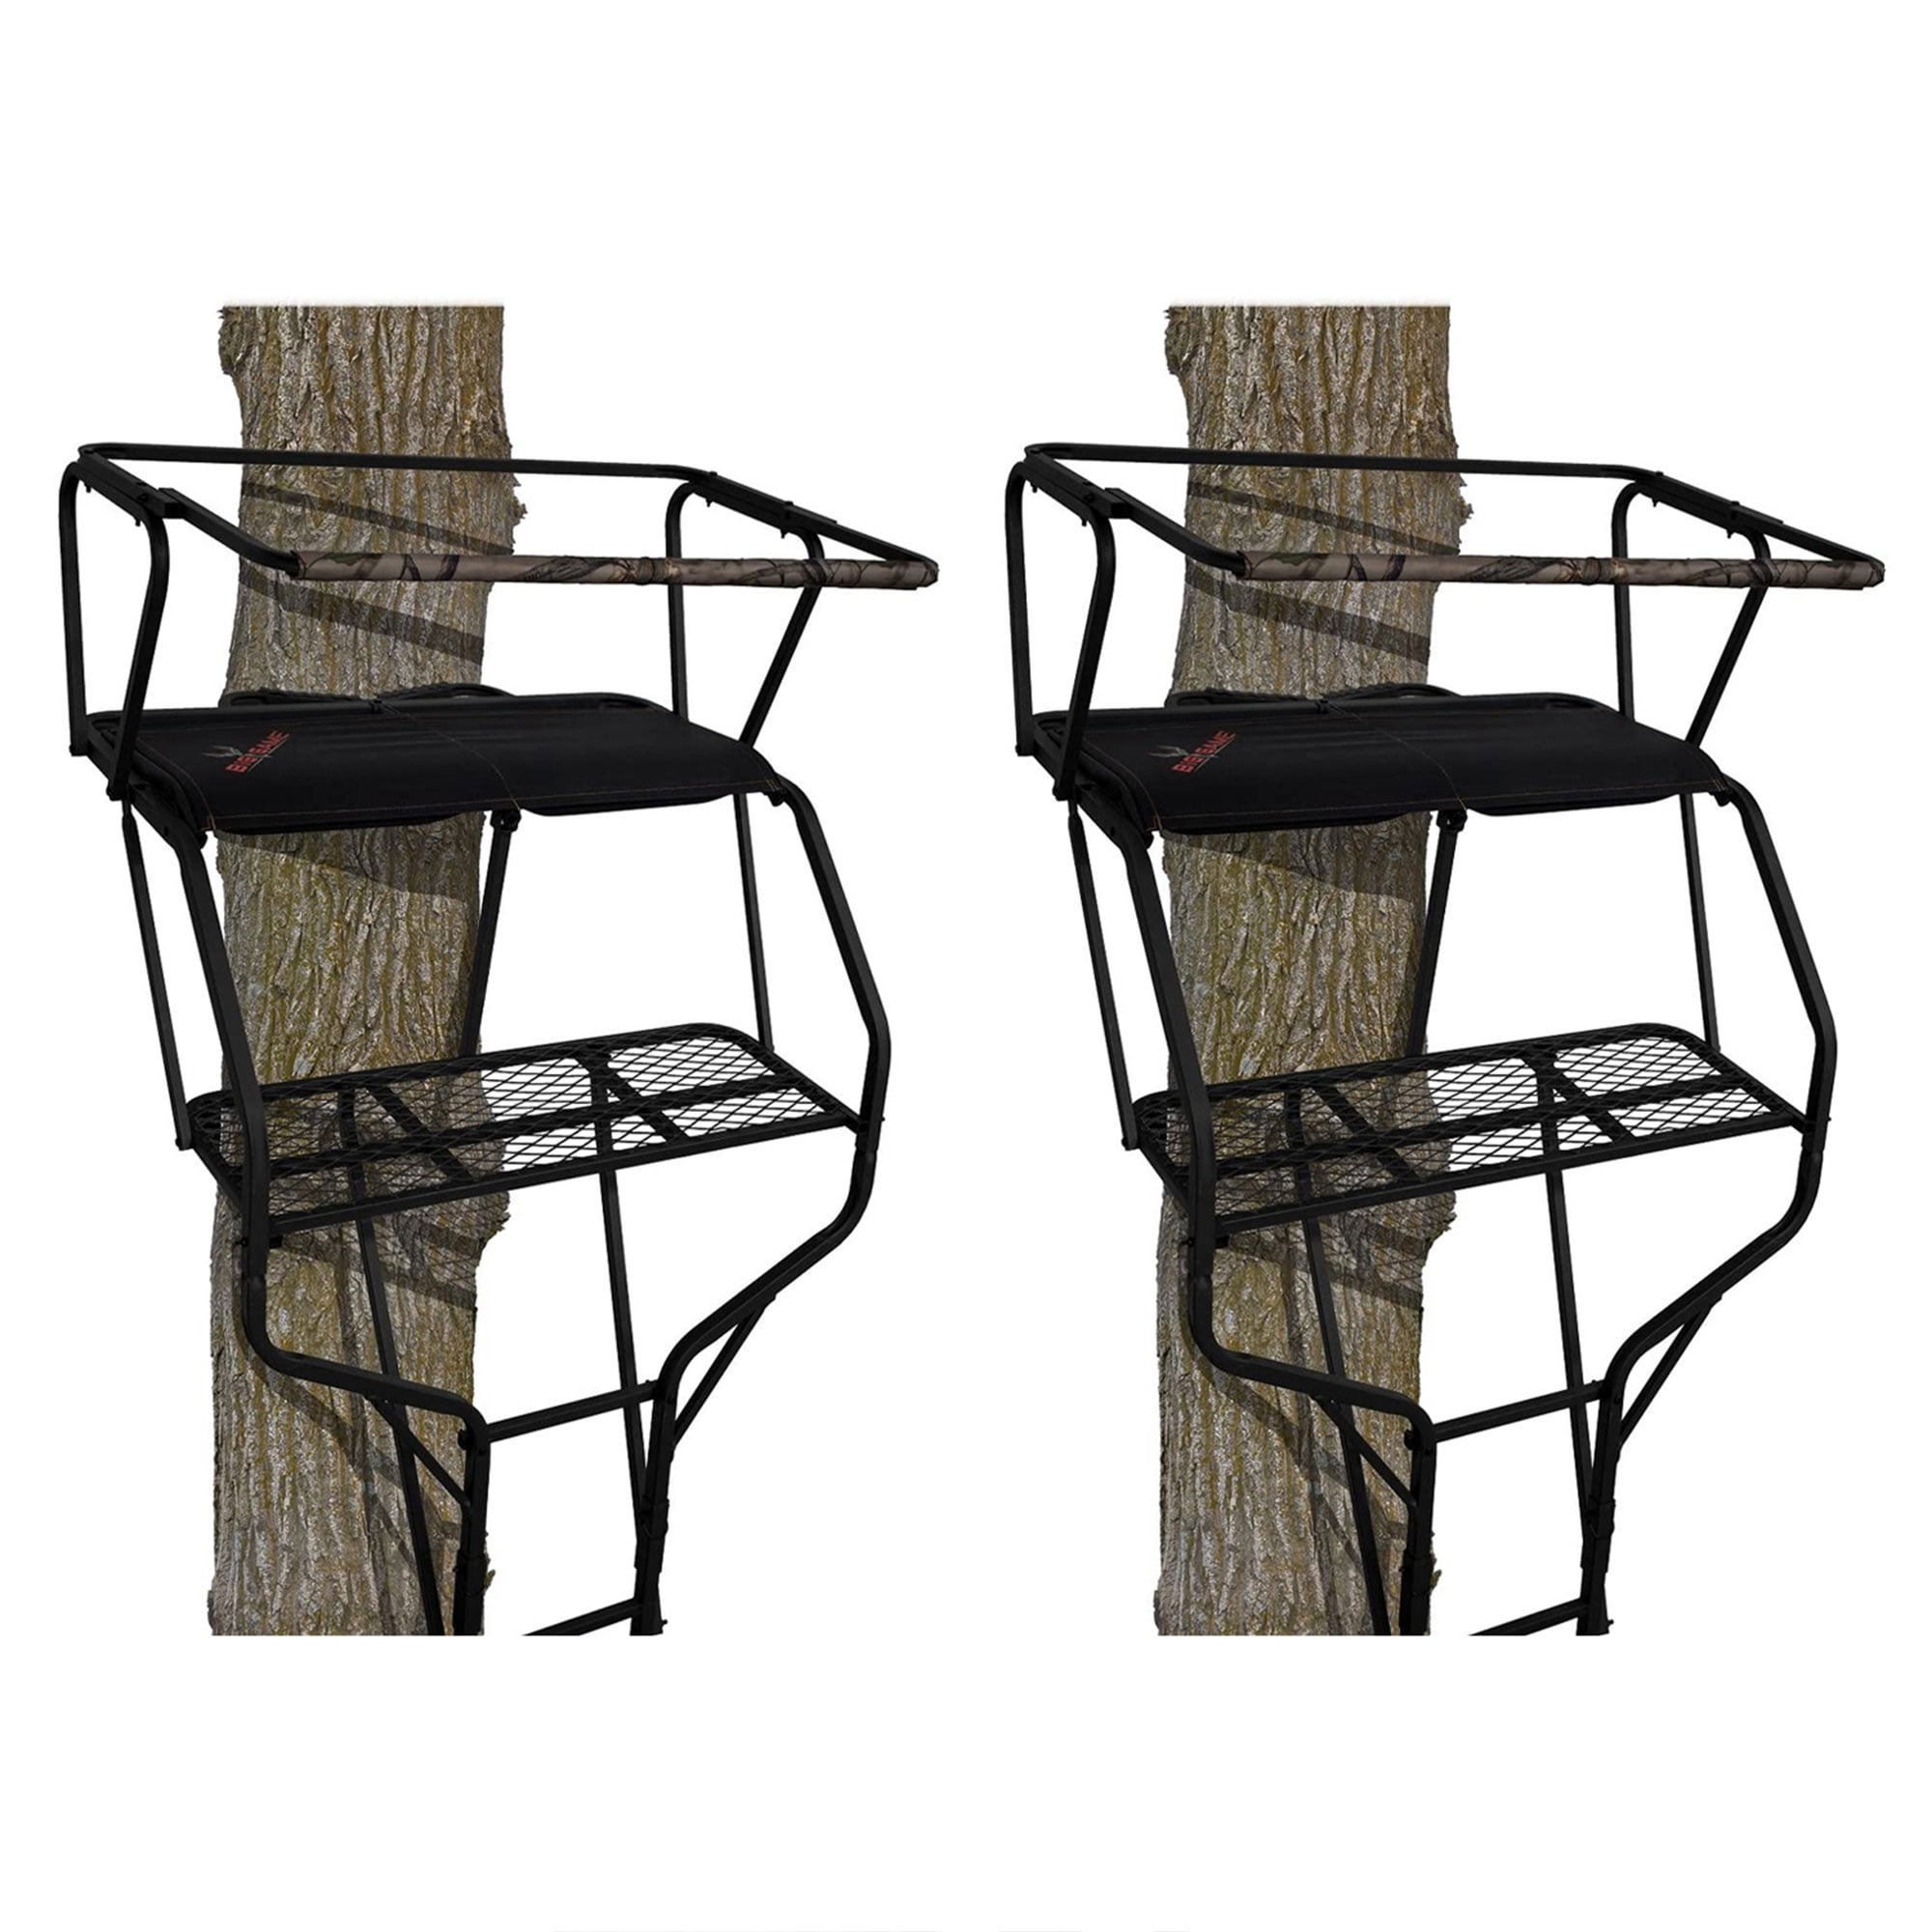 NEW AMERISTEP 8500 TWO MAN 15FT 500LB LADDER DEER HUNTING TREE STAND 3563699 